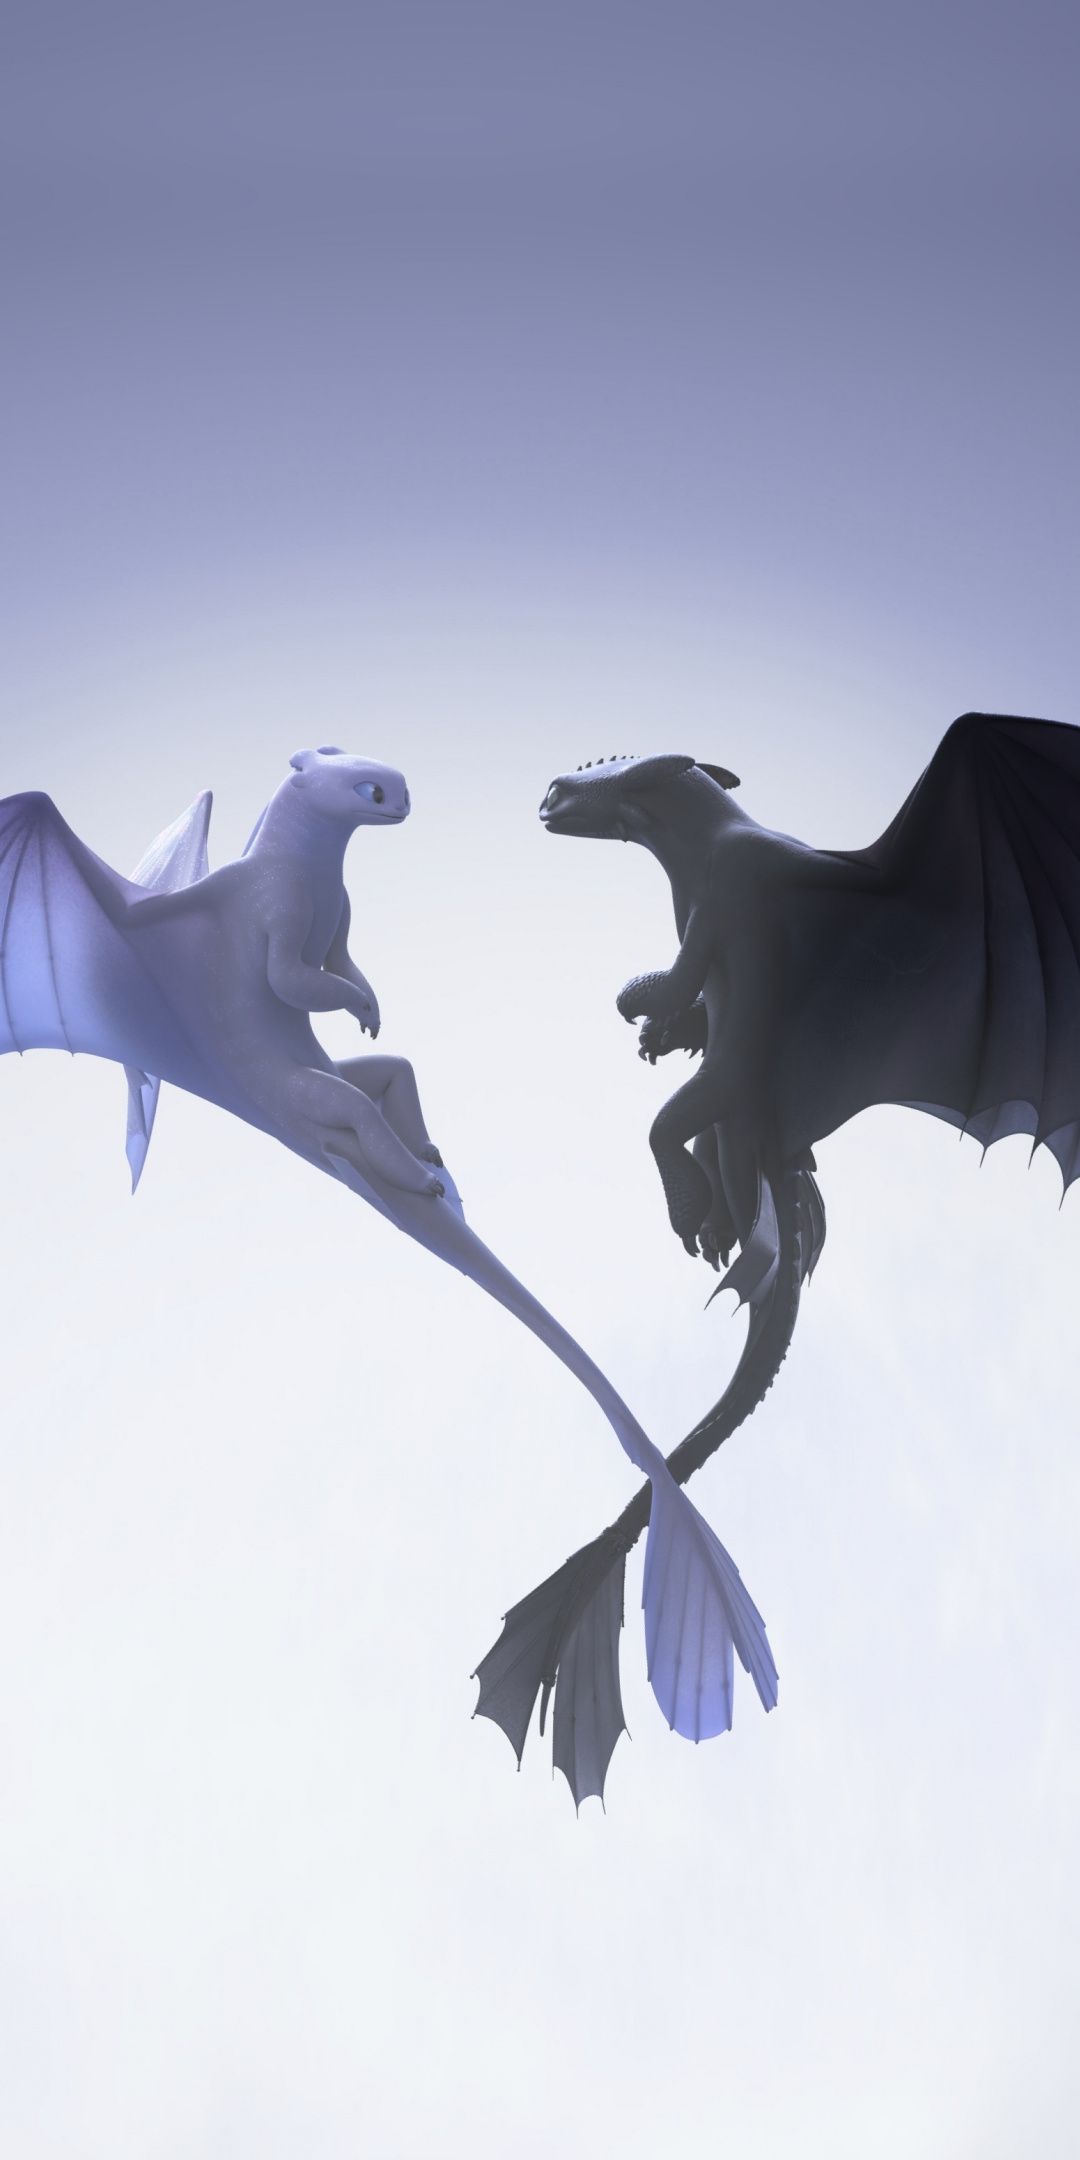 Night and light fury, love in air, dragons, flight Wallpaper. How train your dragon, How to train your dragon, Night fury dragon